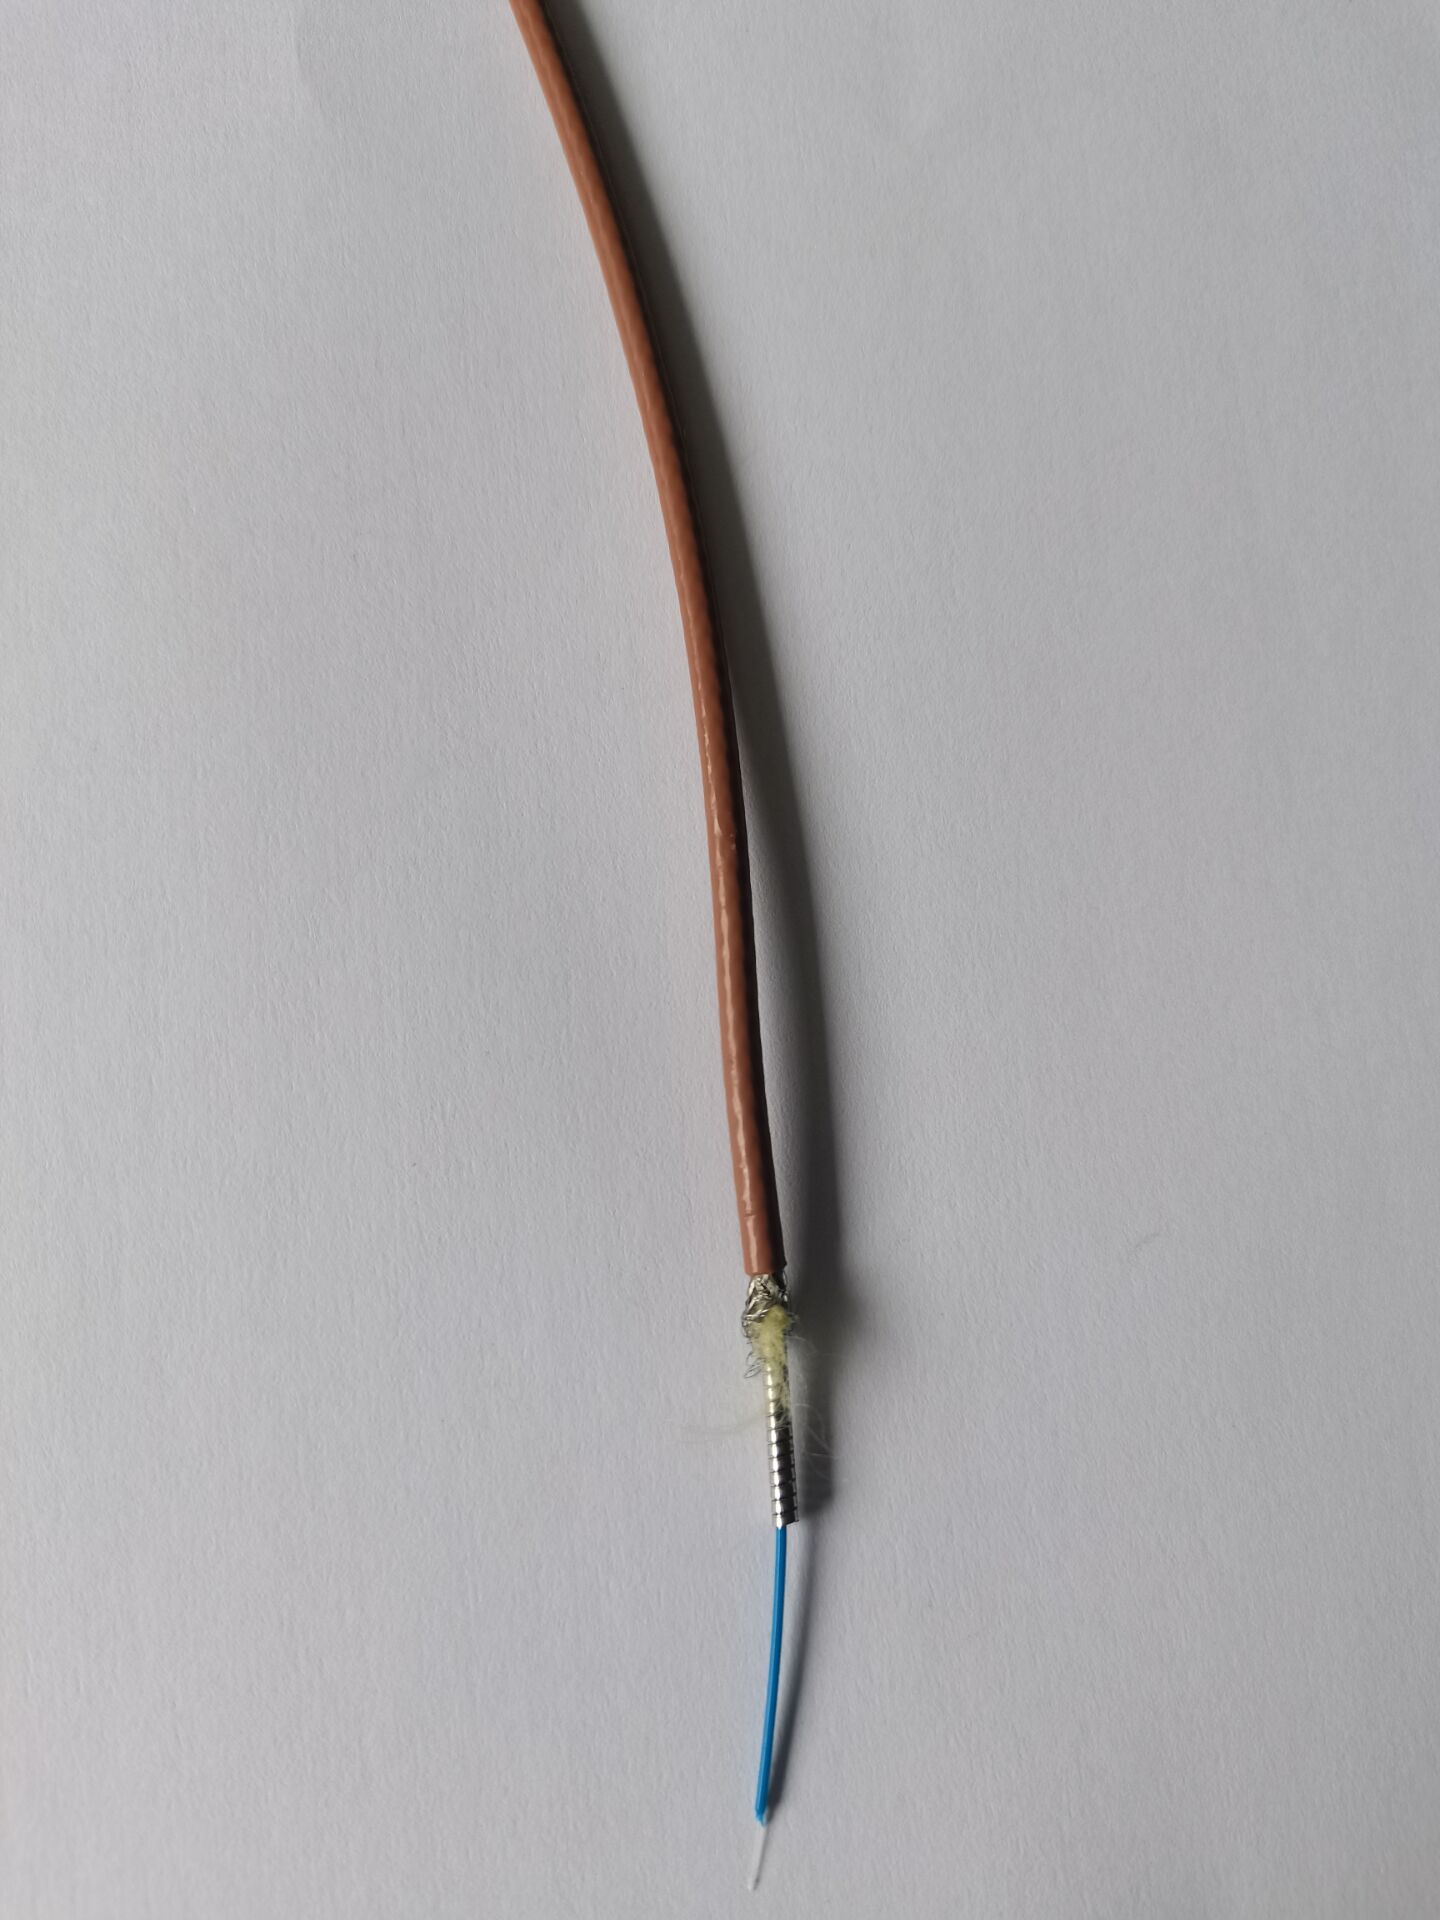 200000Gy Radiation Resistant Single-mode Fibre cable,Radiation Resistant Single-mode Fibre Cable，Radio-Resistant fibers Cable 